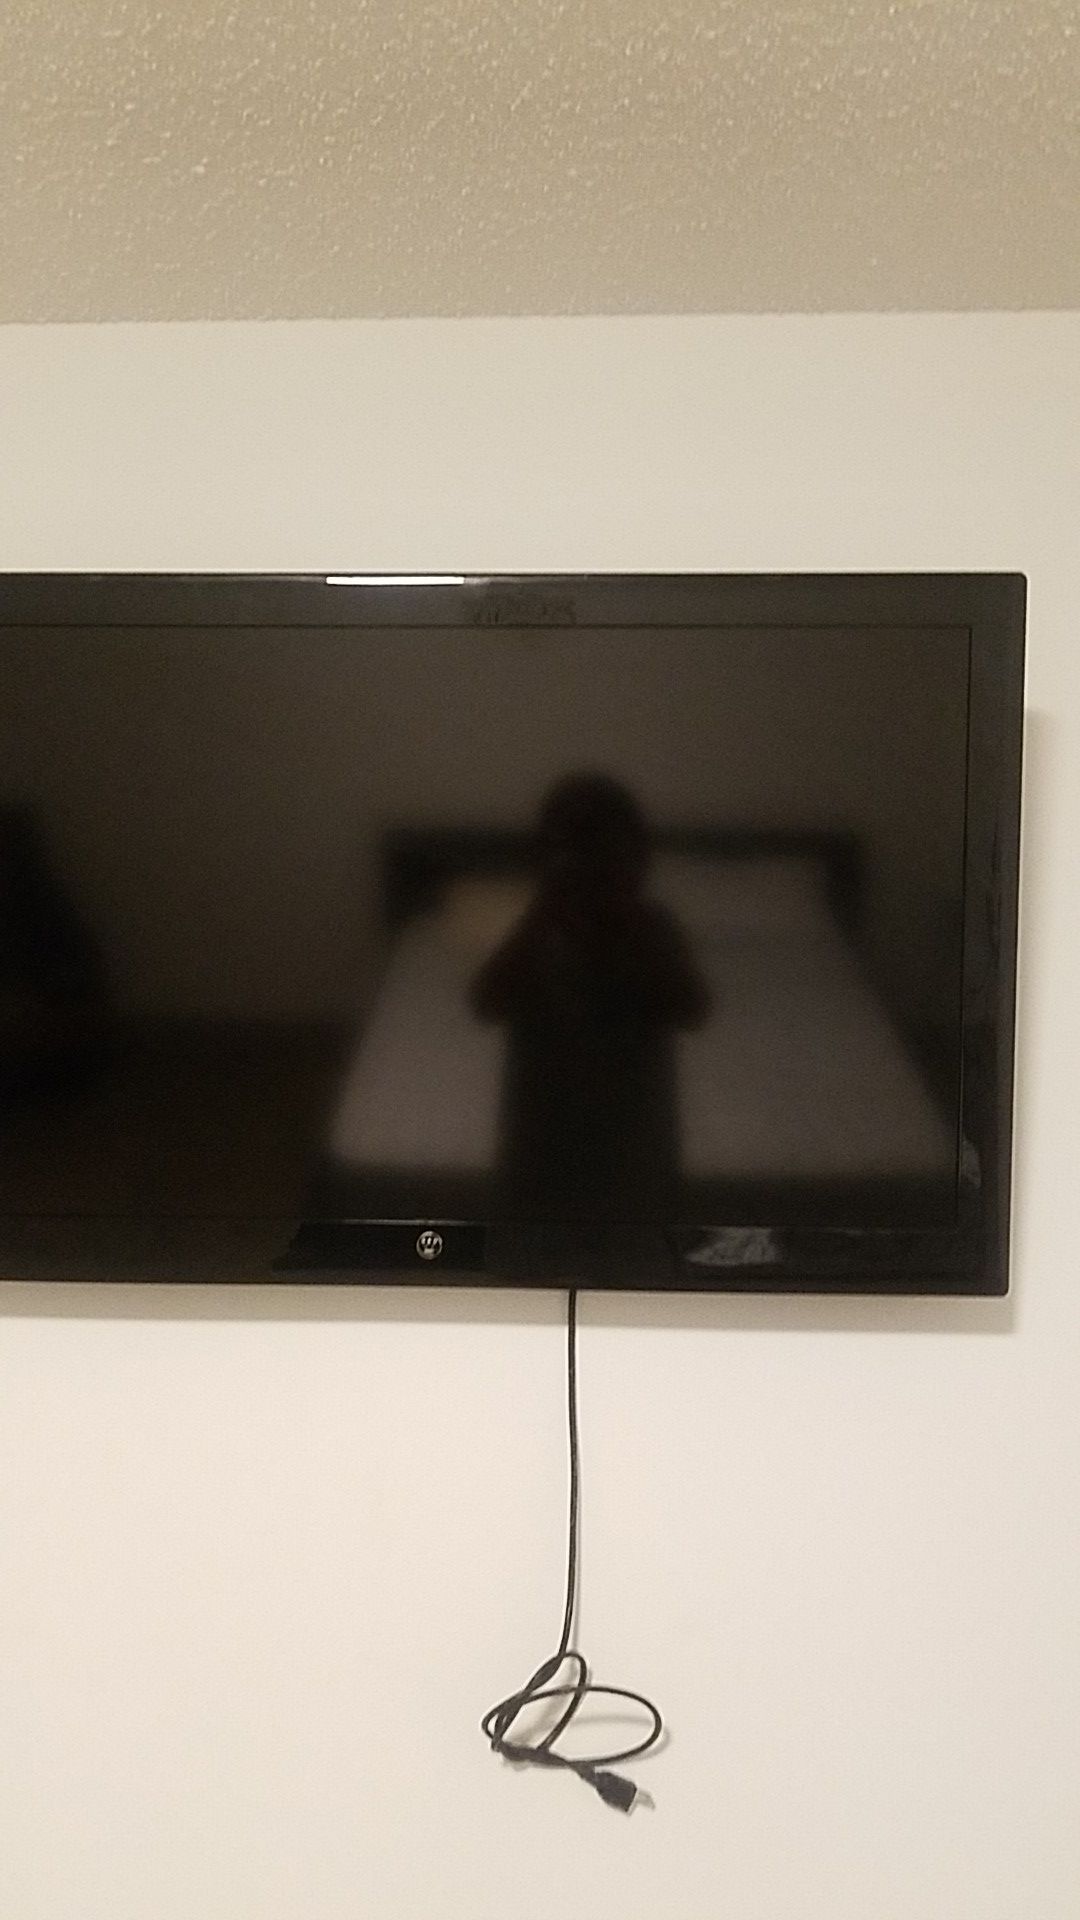 Tv size 40 with base